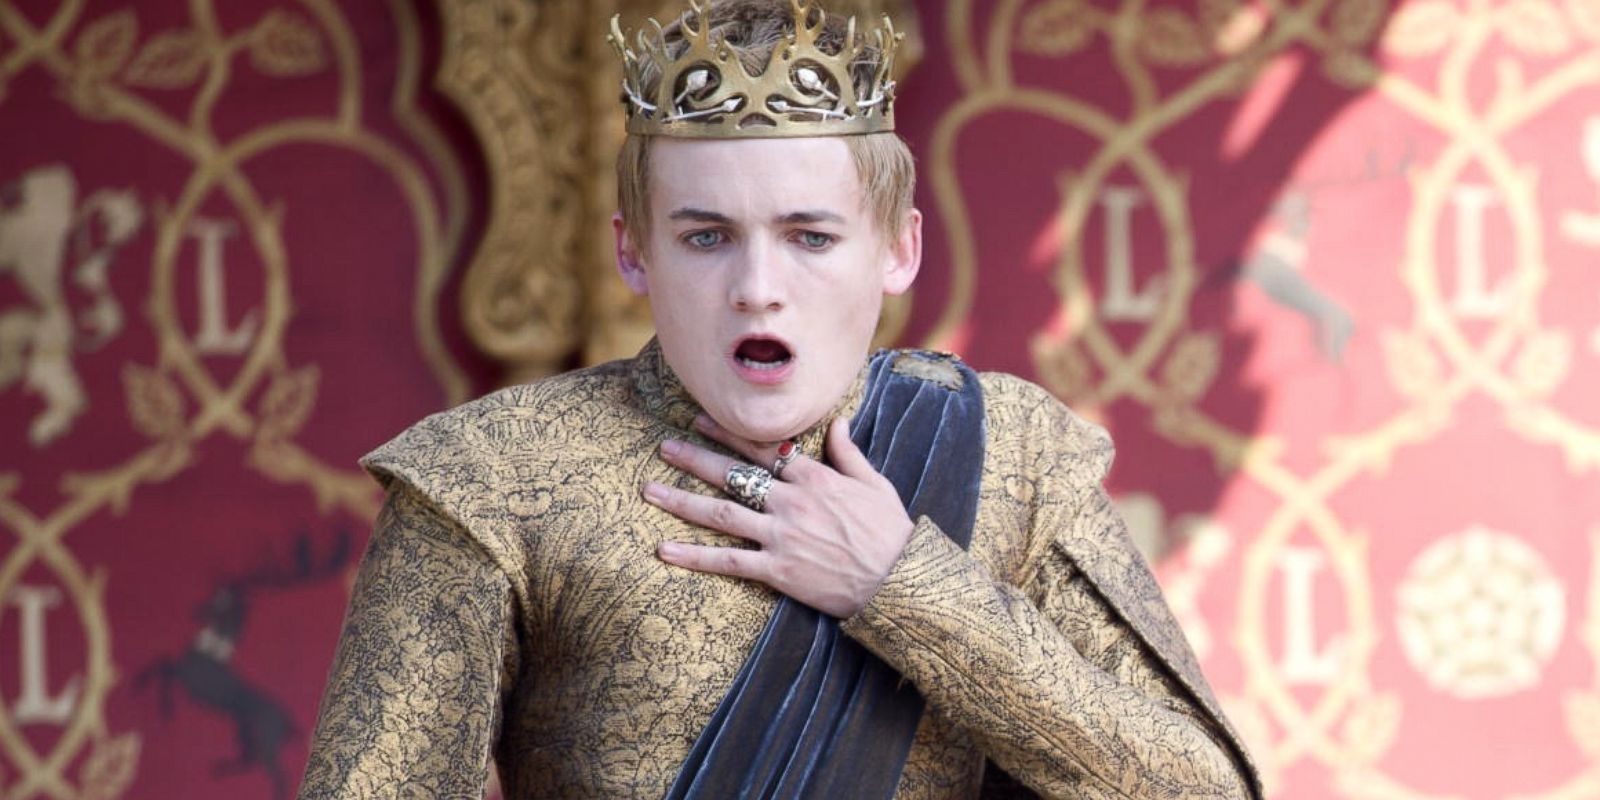 Joffrey holding his throat as he chokes in Game of Thrones